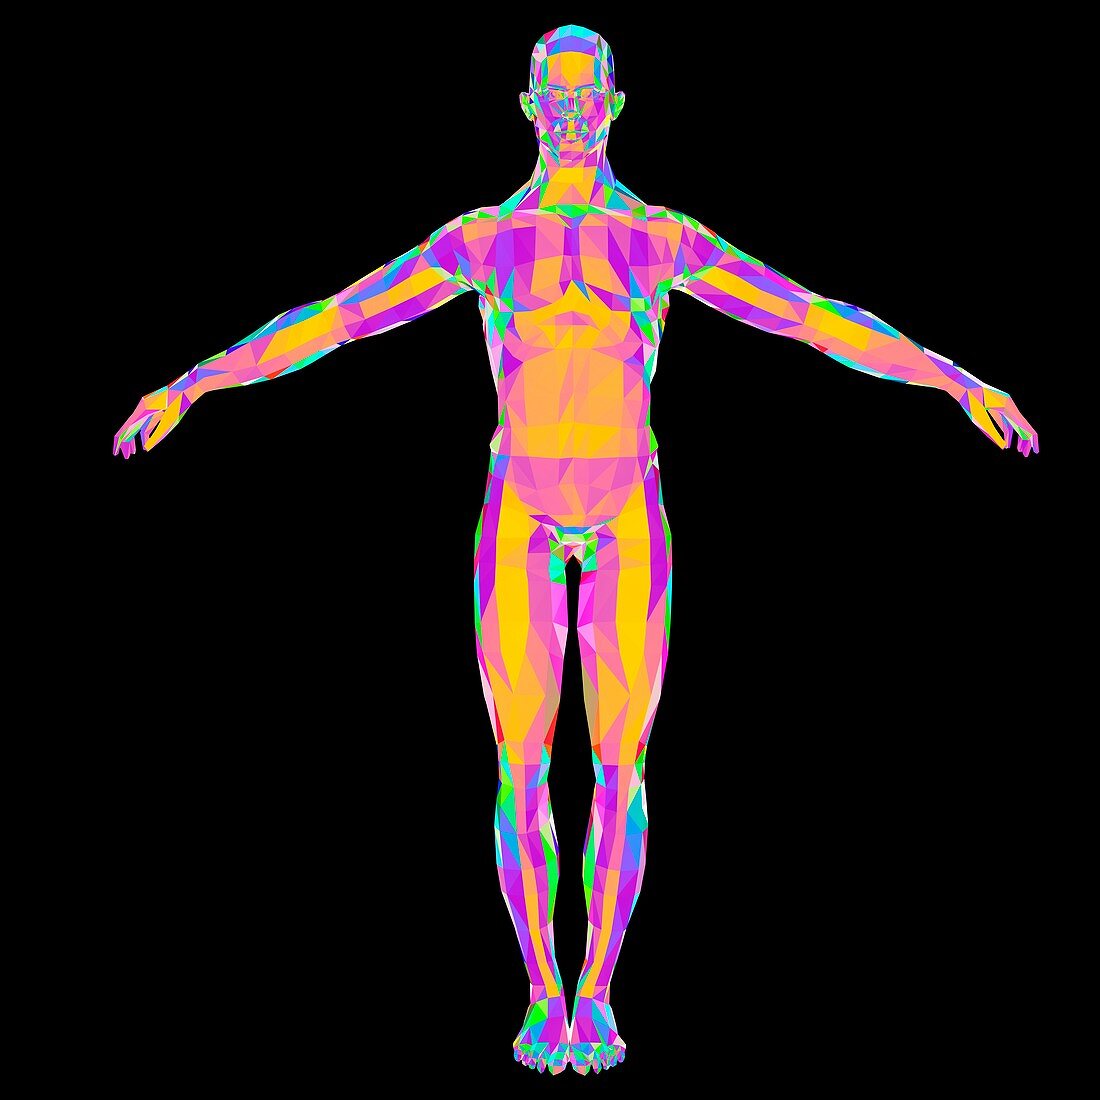 Abstract polygonal model of a man